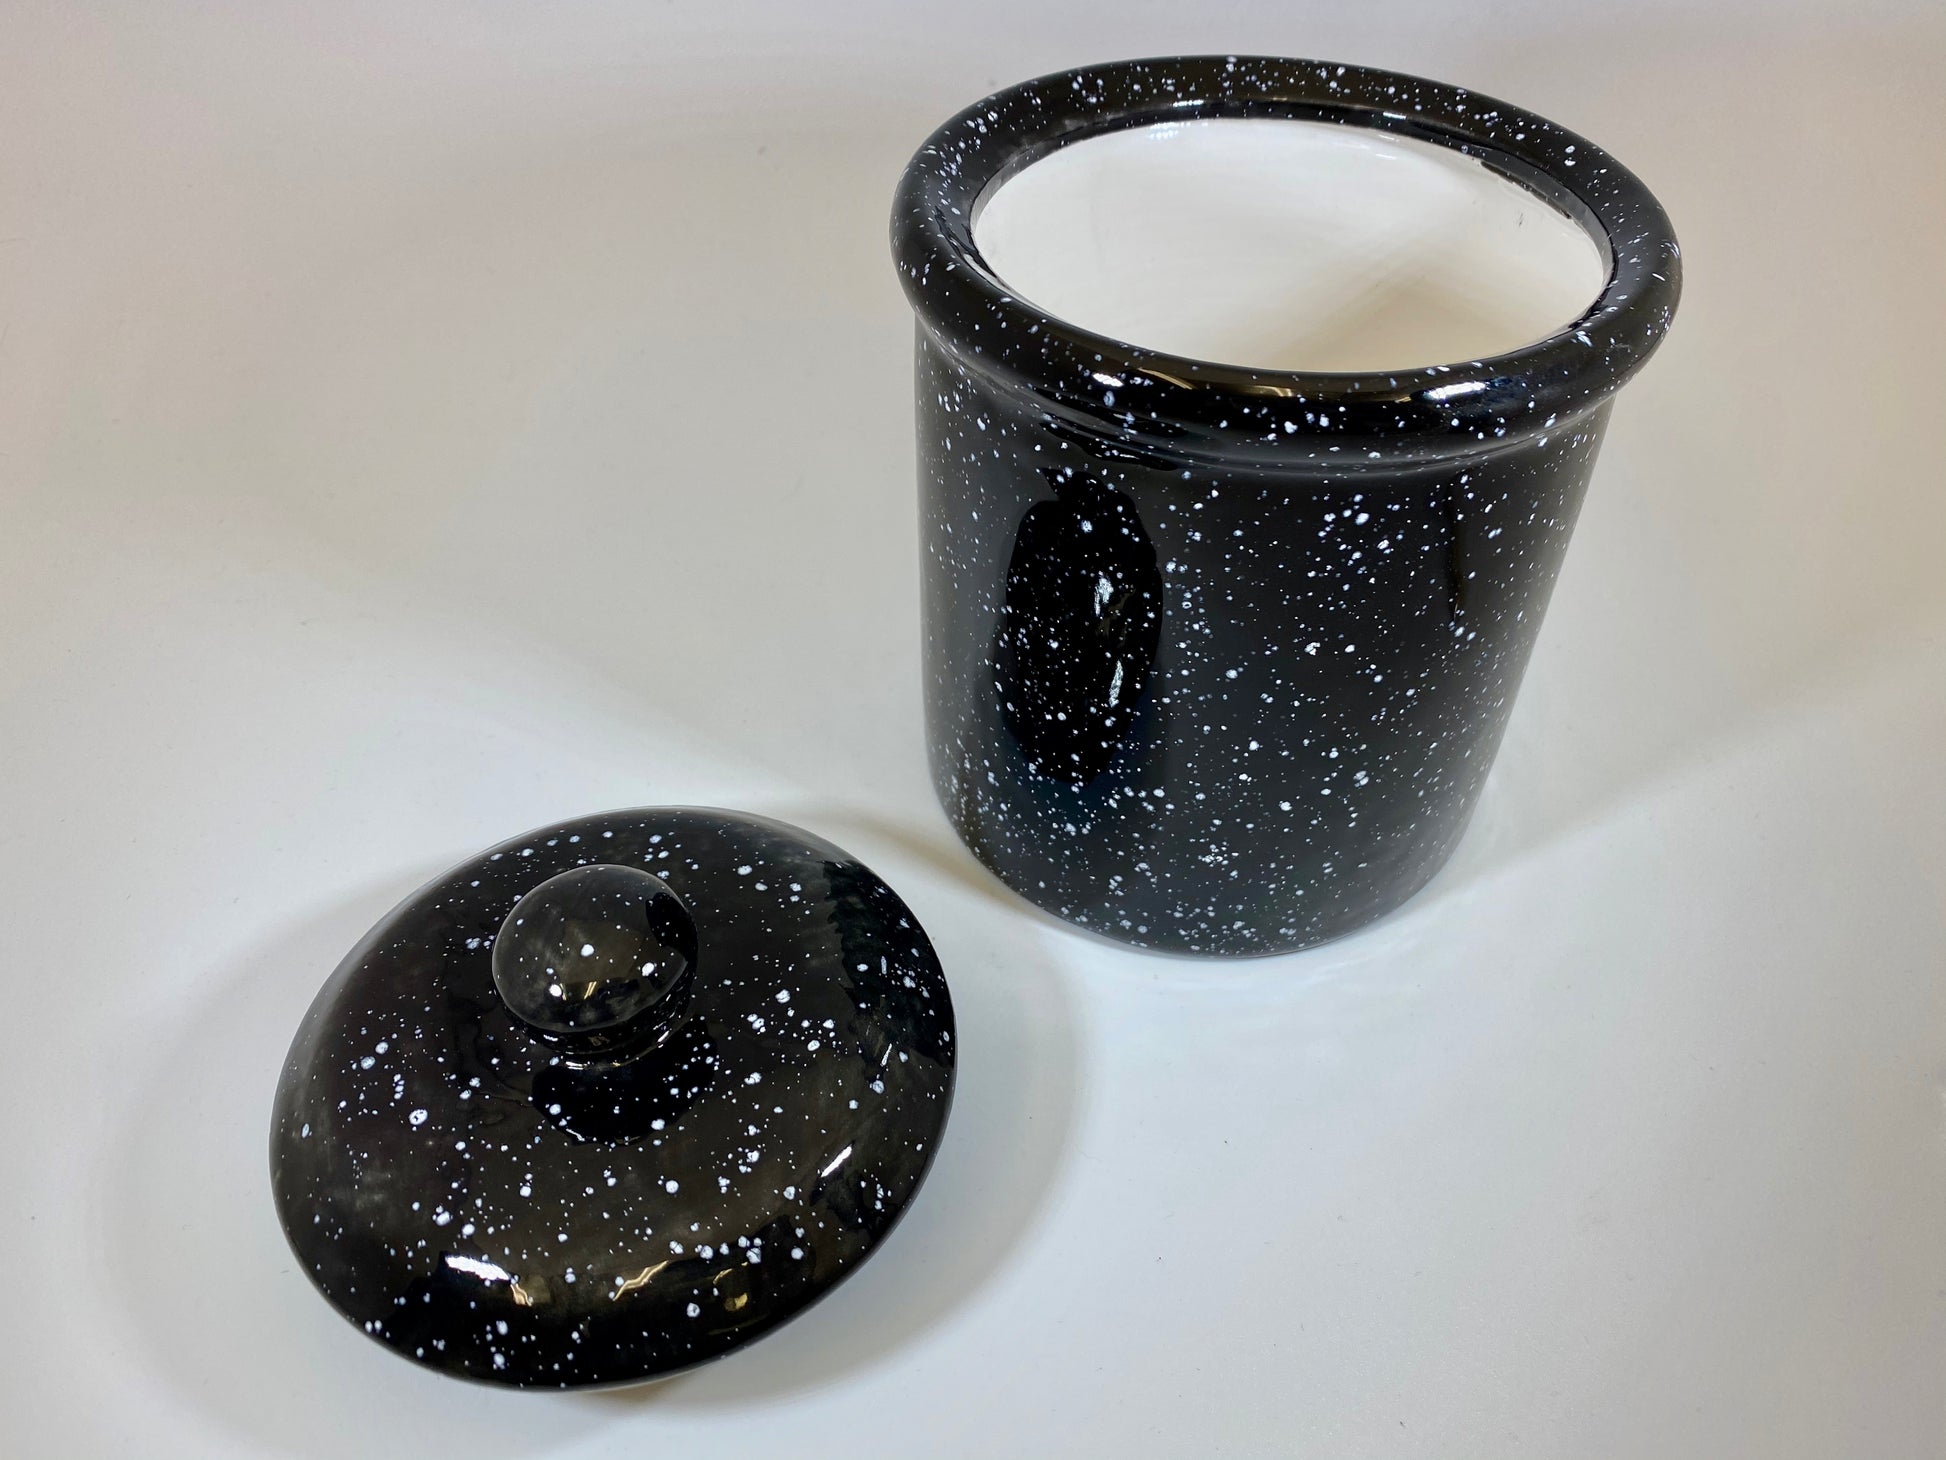 Speckled Black Canister for Tea or Coffee - PeterBowenArt